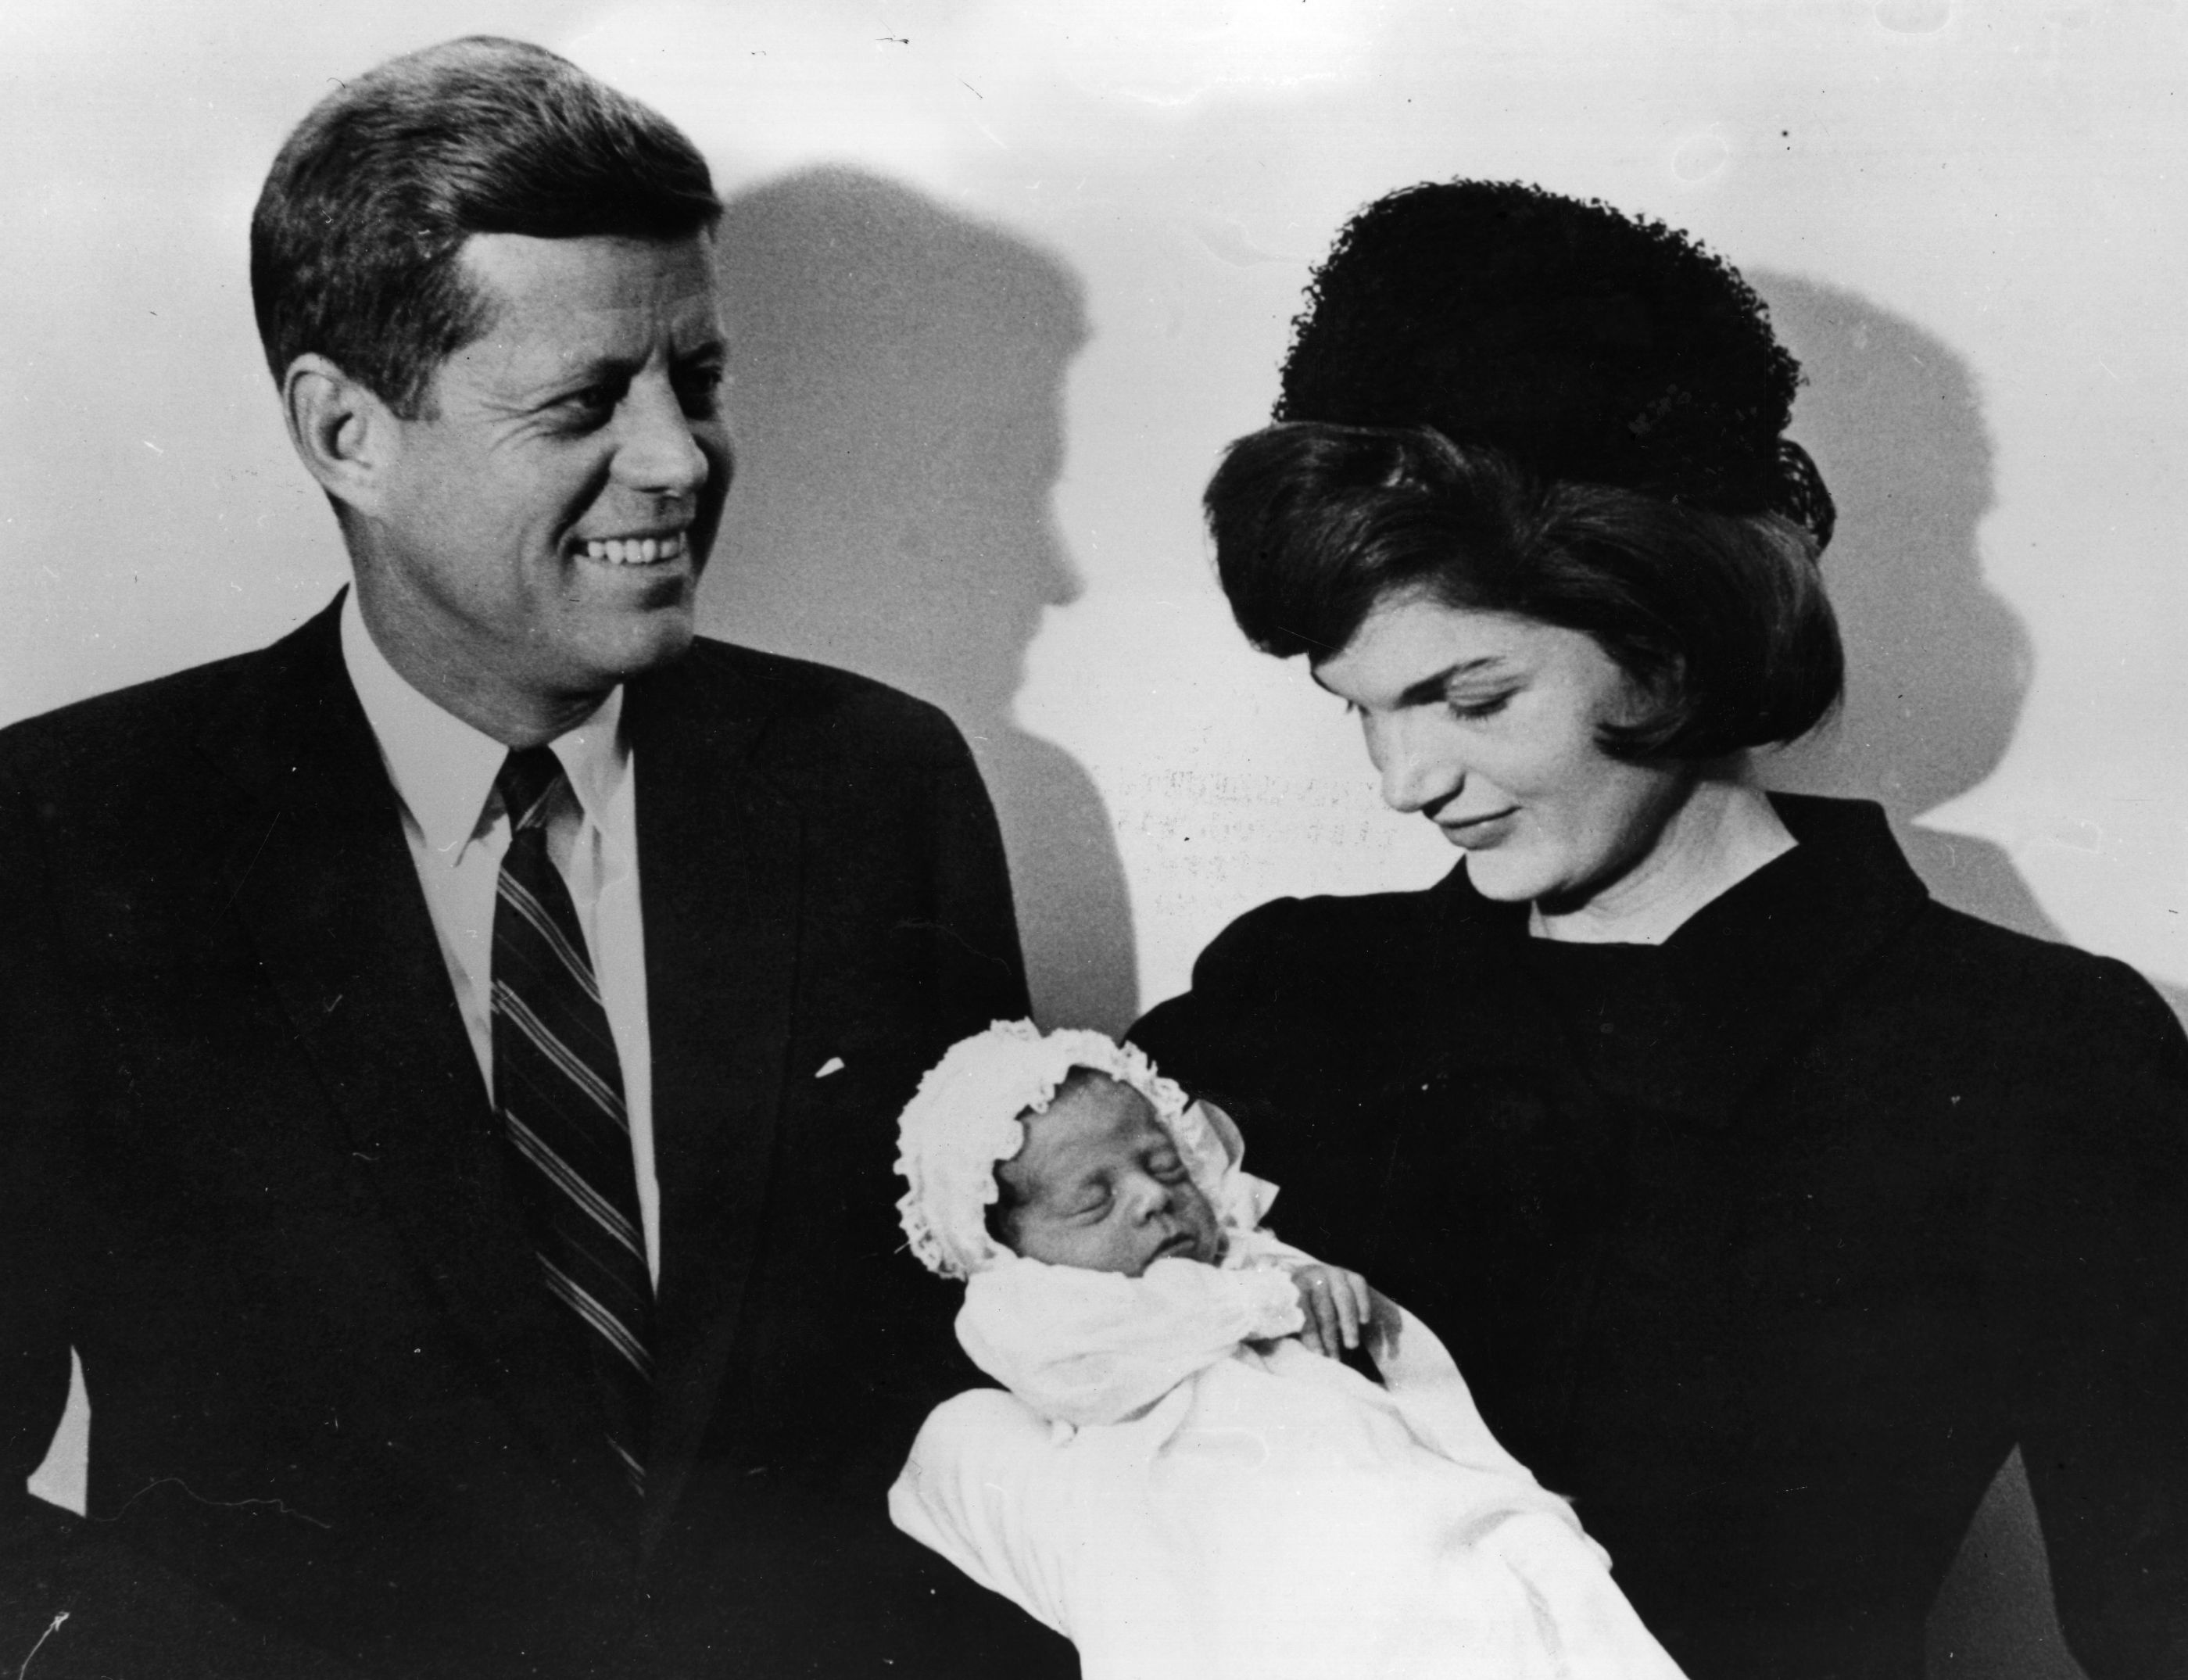 John F. Kennedy and Jacqueline Kennedy at the christening of their son John F Jr.